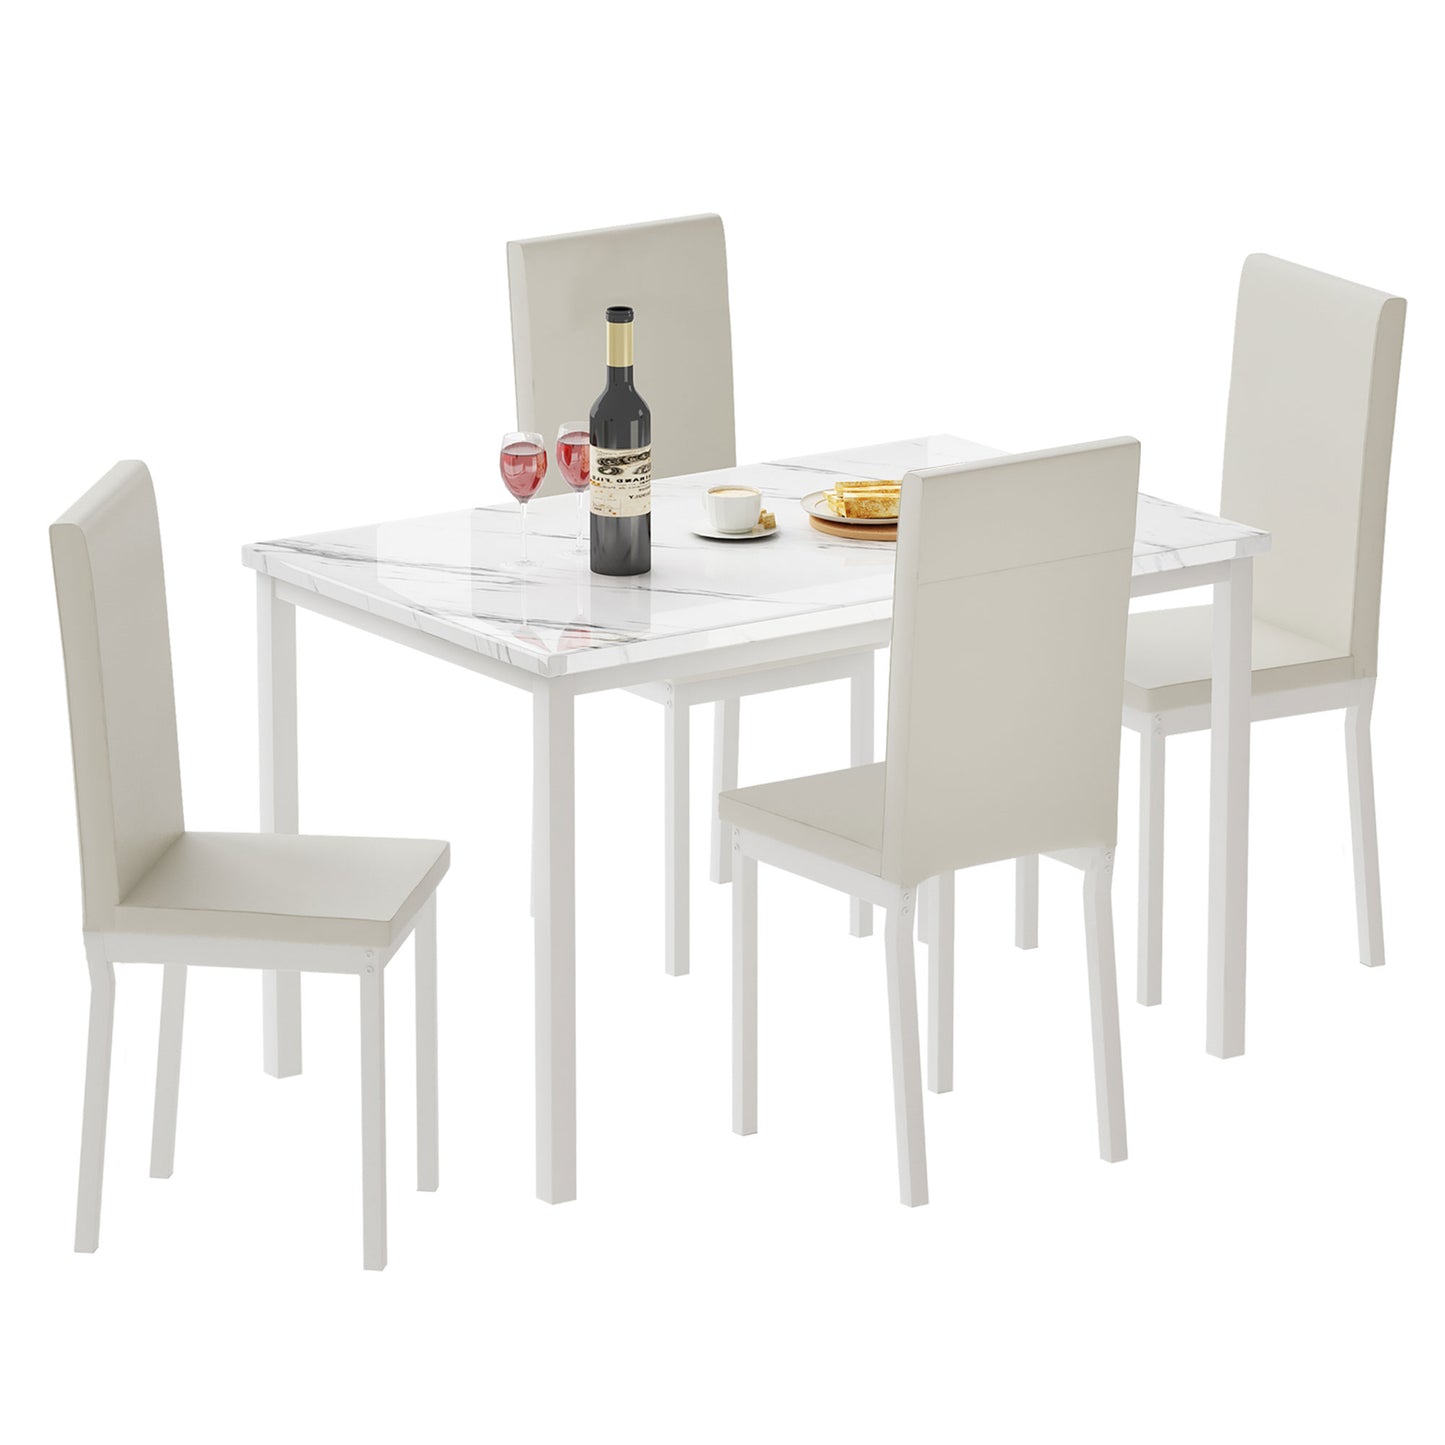 Modern Dining Table Set for 4, Faux Marble Table and PU Leather Upholstered Chairs Set, 5 Piece Kitchen Dining Set, Dining Table and Chairs Set for Small Space, Breakfast Nook, Brown, D7153